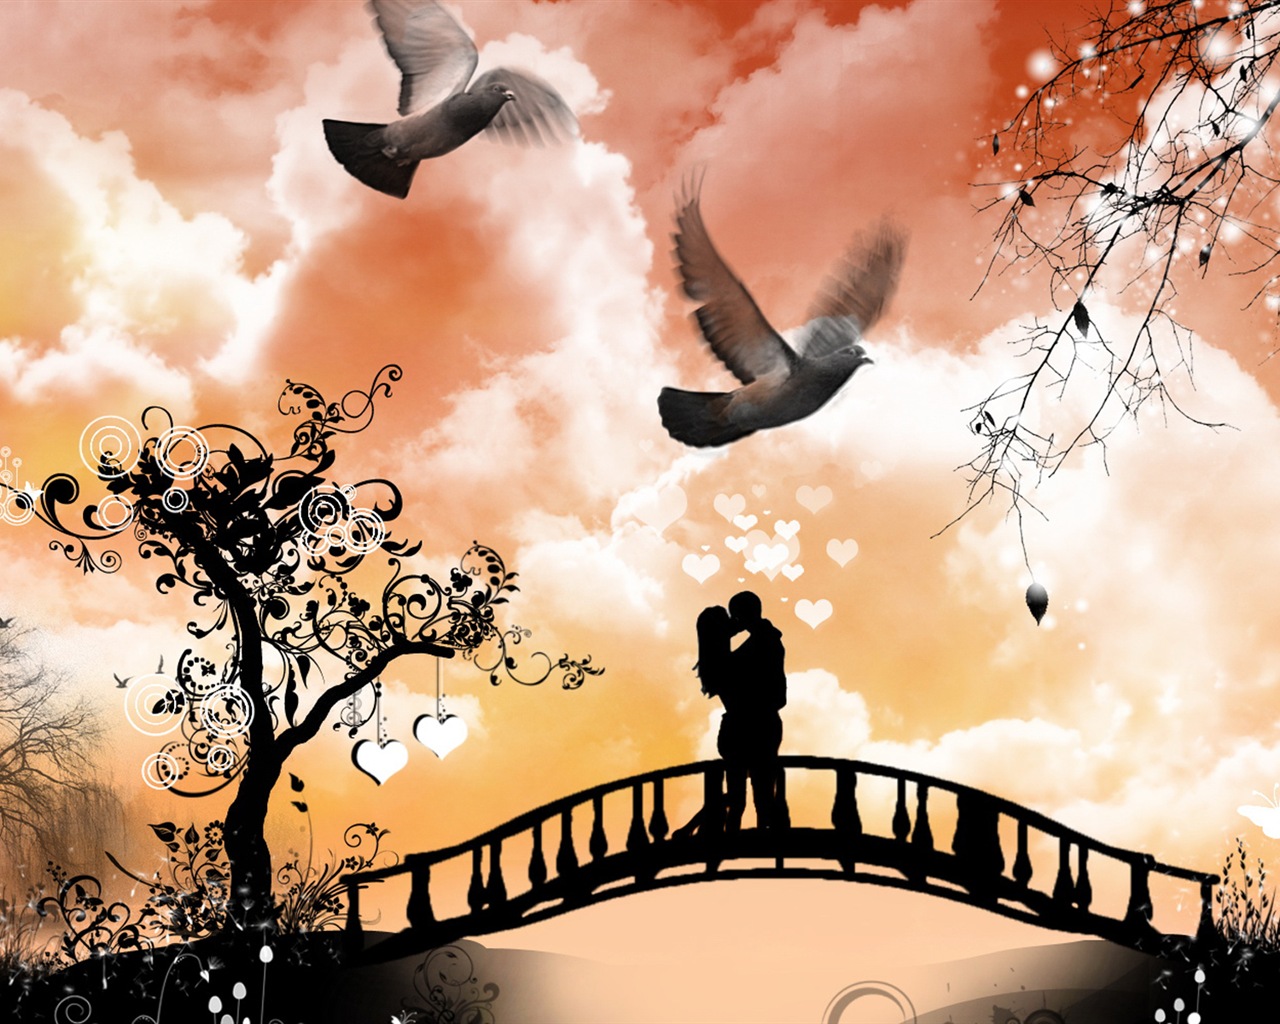 Warm and romantic Valentine's Day HD wallpapers #20 - 1280x1024